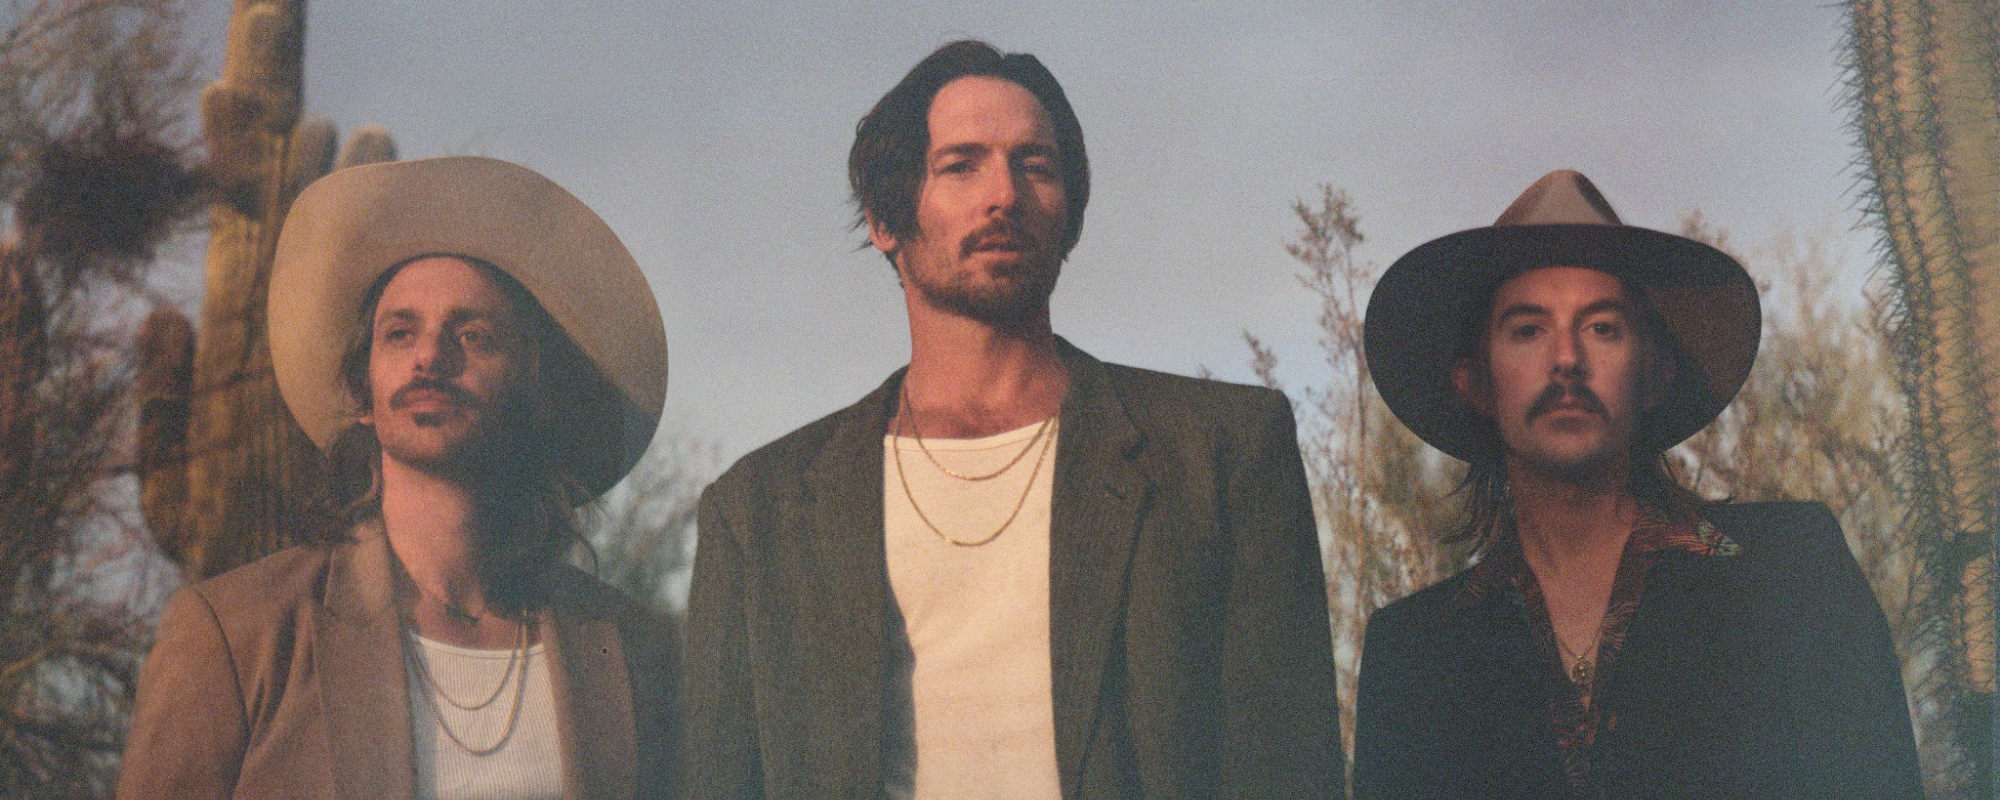 Midland Gives A Taste of Their Year Off the Road With New 5-Track Collection ‘The Last Resort’